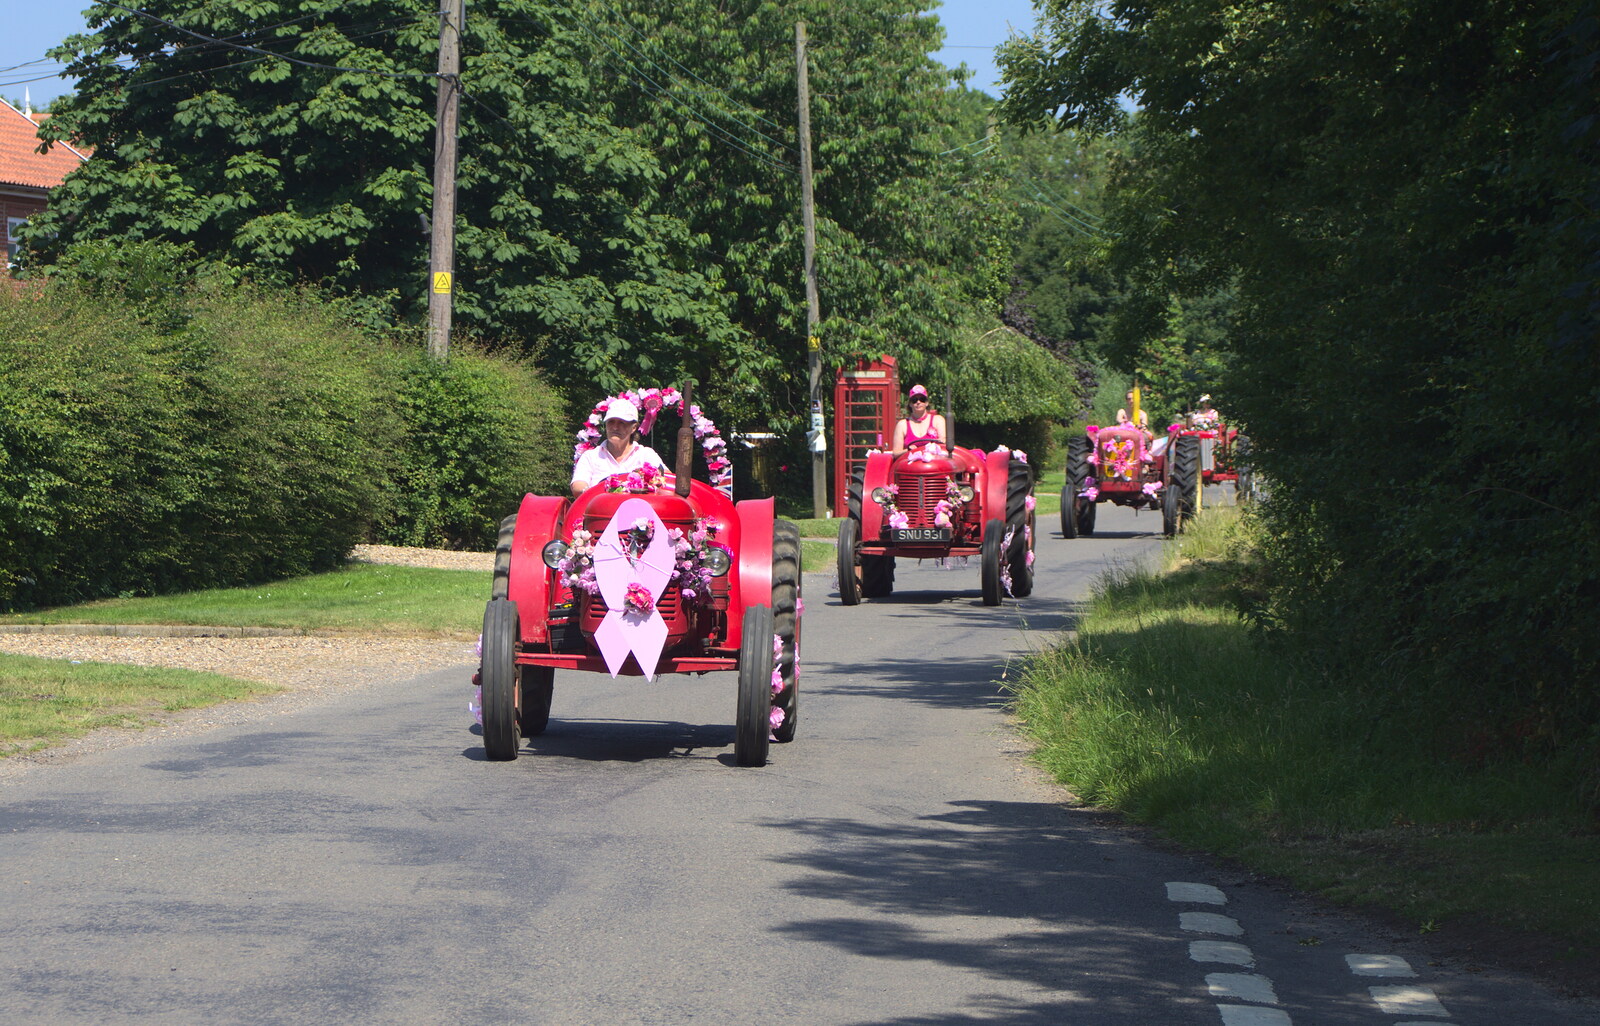 The first pink tractors rumble down the lane from The "Pink Ladies" Tractor Run and Barbeque, Thorpe Abbots, Norfolk - 7th July 2013